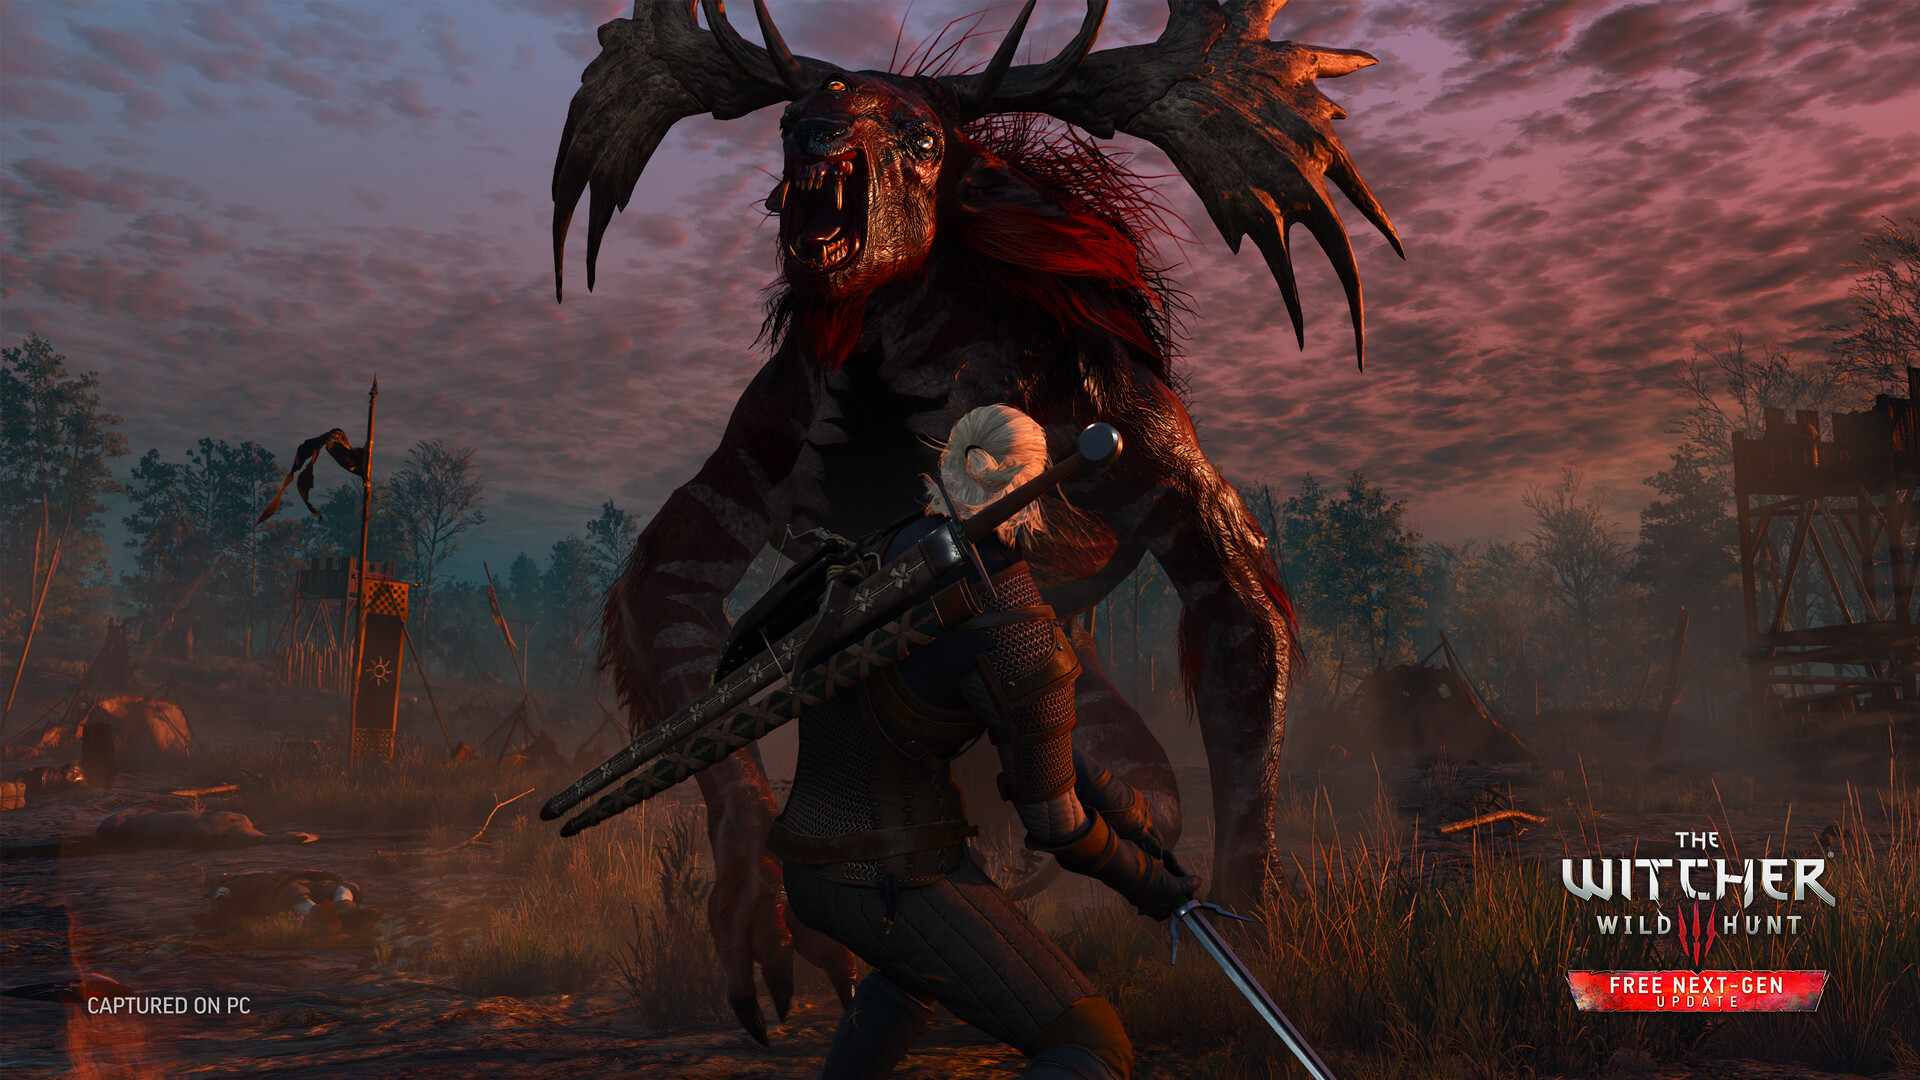 The Witcher 3: Wild Hunt's Next-Gen Update Comes to Epic Game